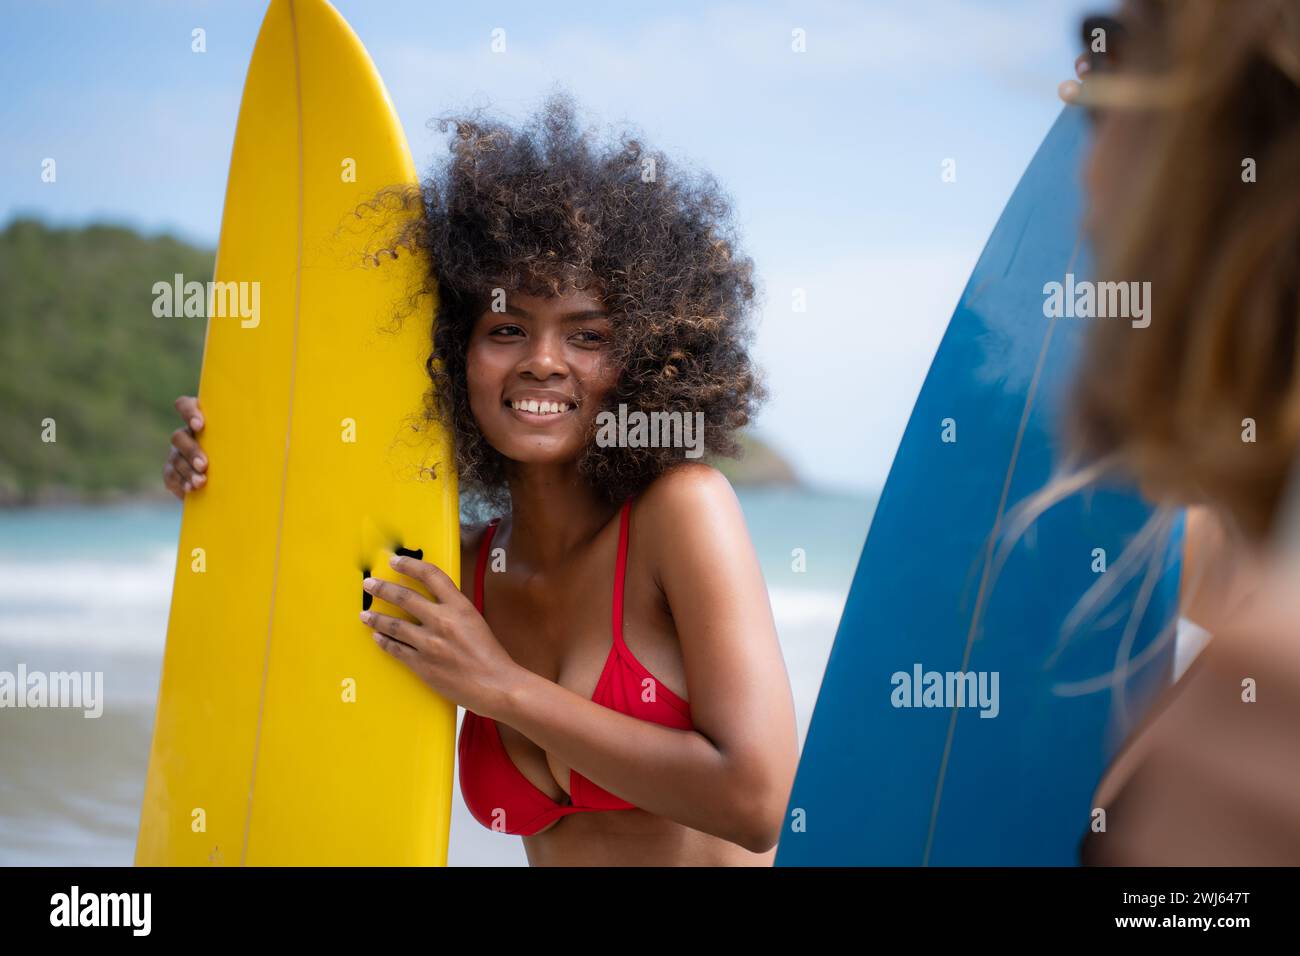 Portrait of smiling young woman in bikini with surfboard at beach Stock Photo